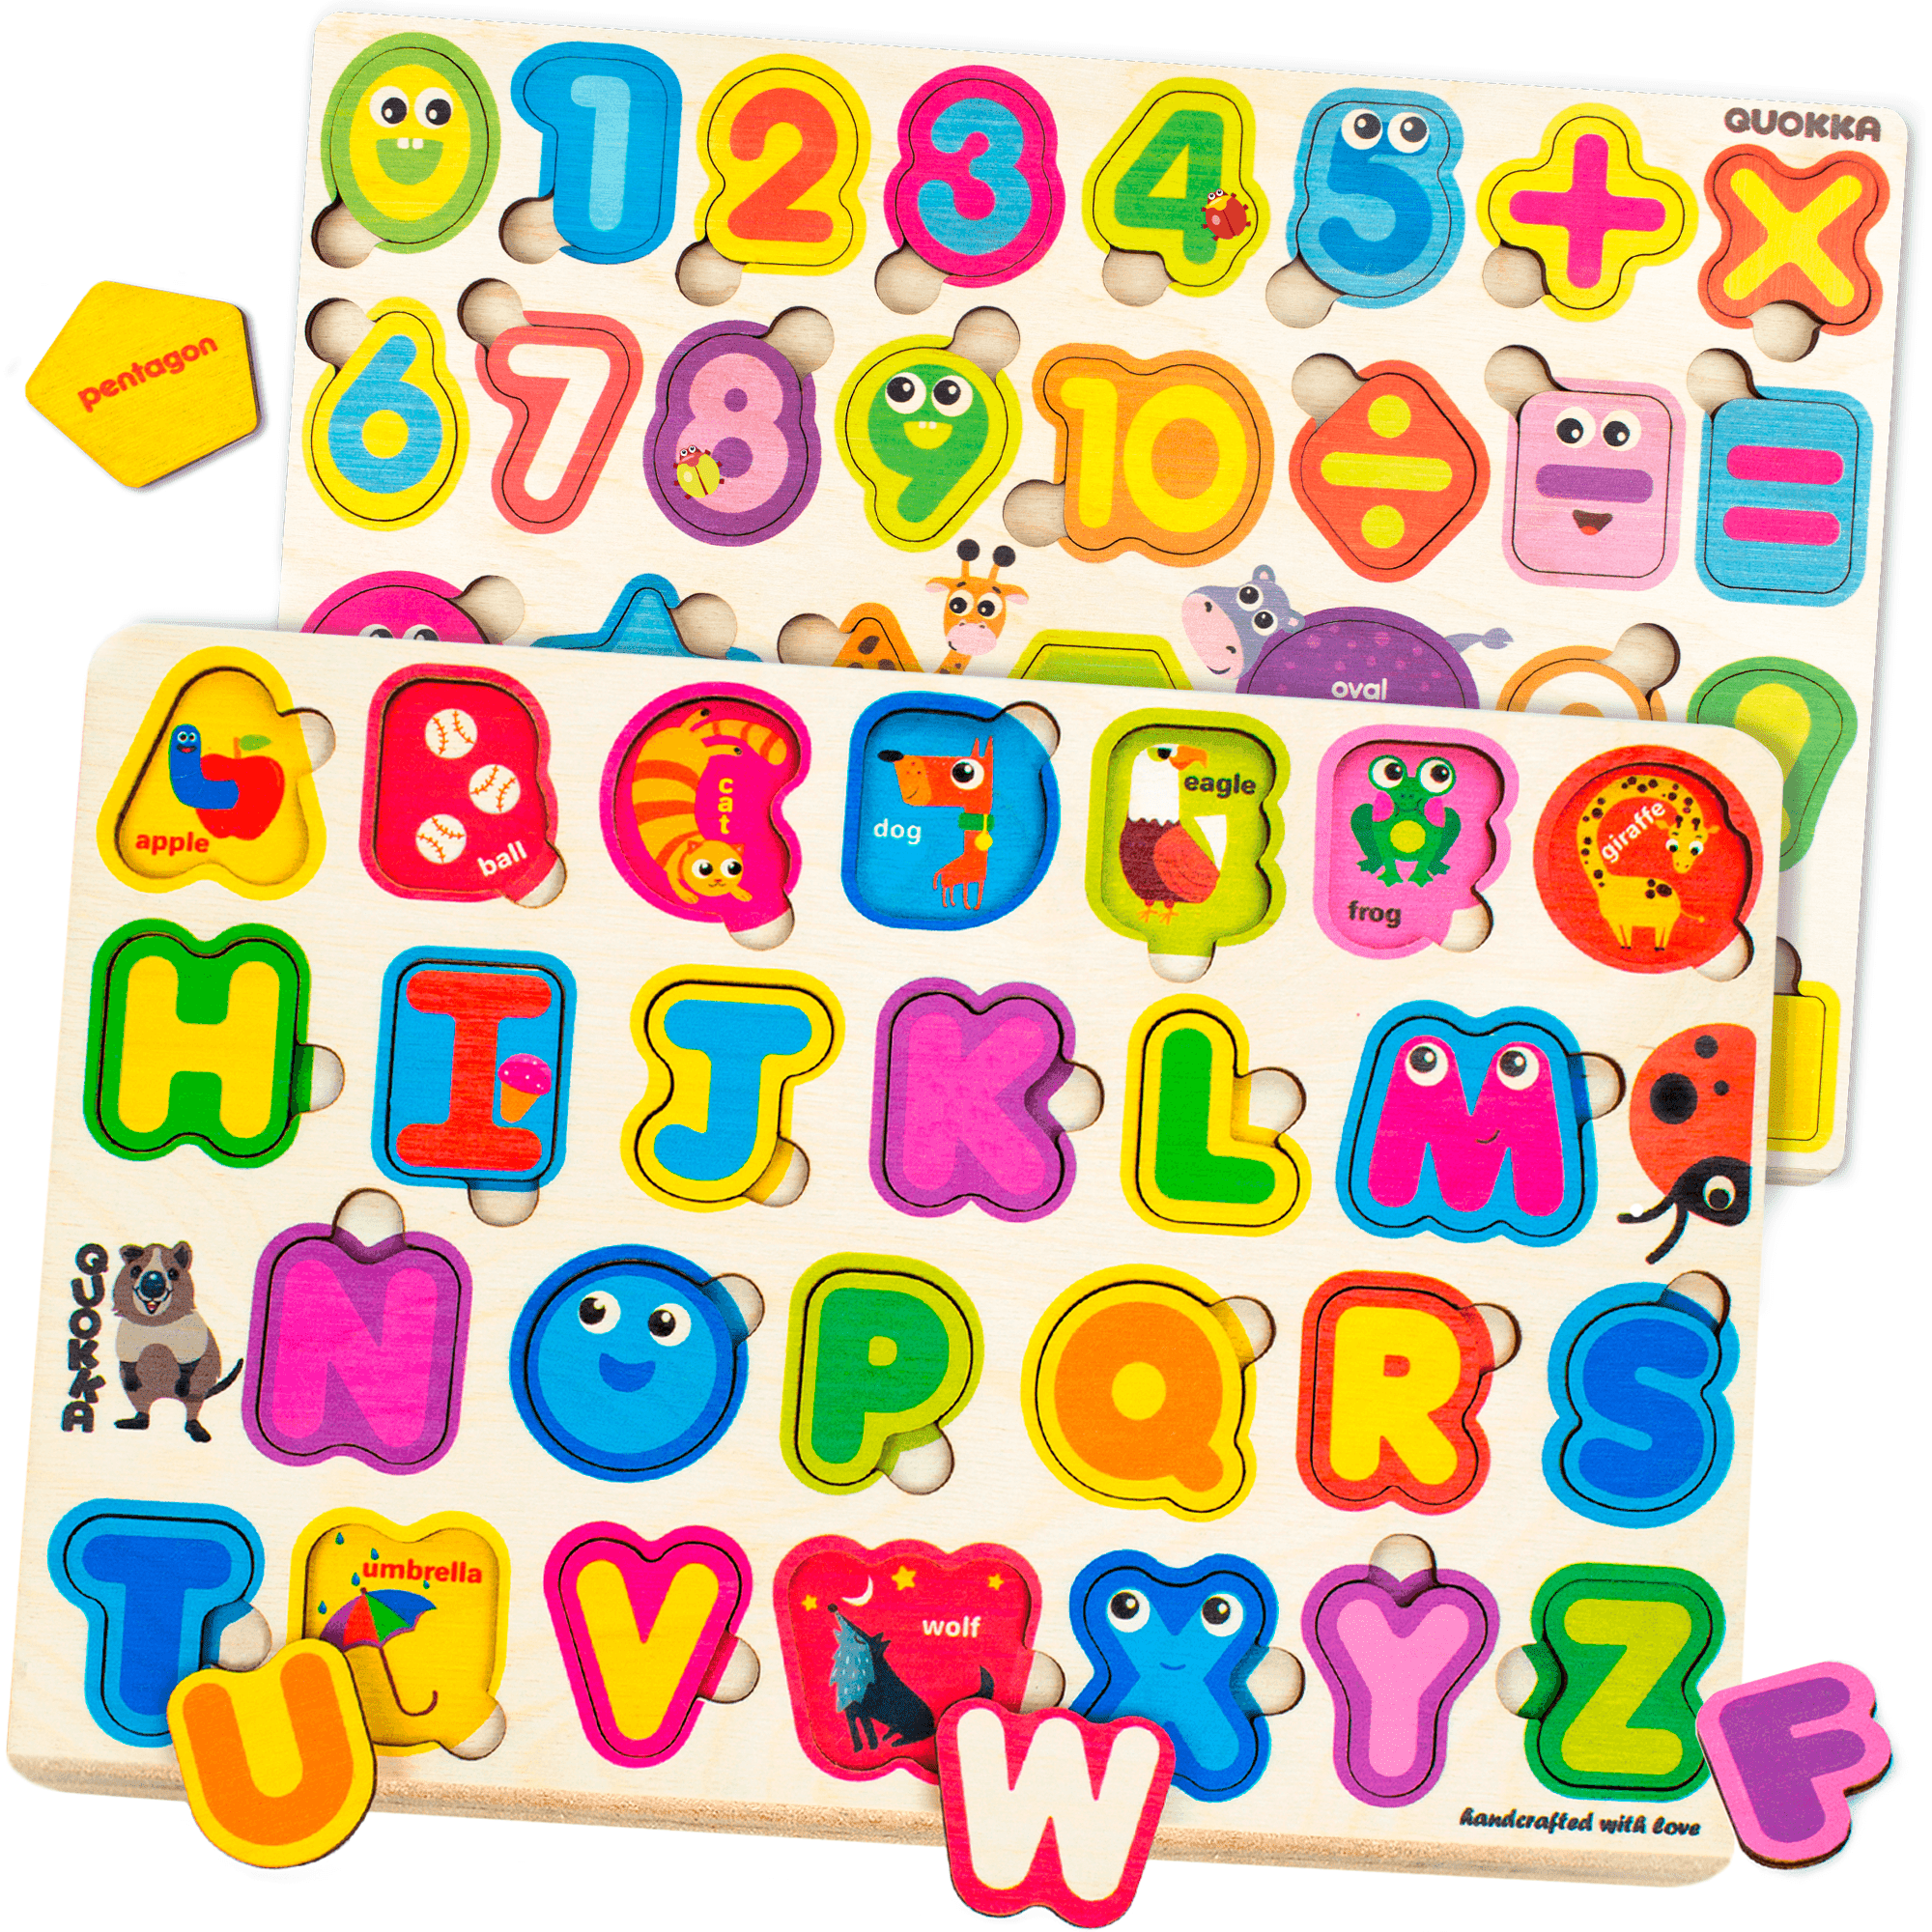 Quokka Wooden Abc Alphabet Shapes Puzzles Games For Toddlers 2 3 4 5